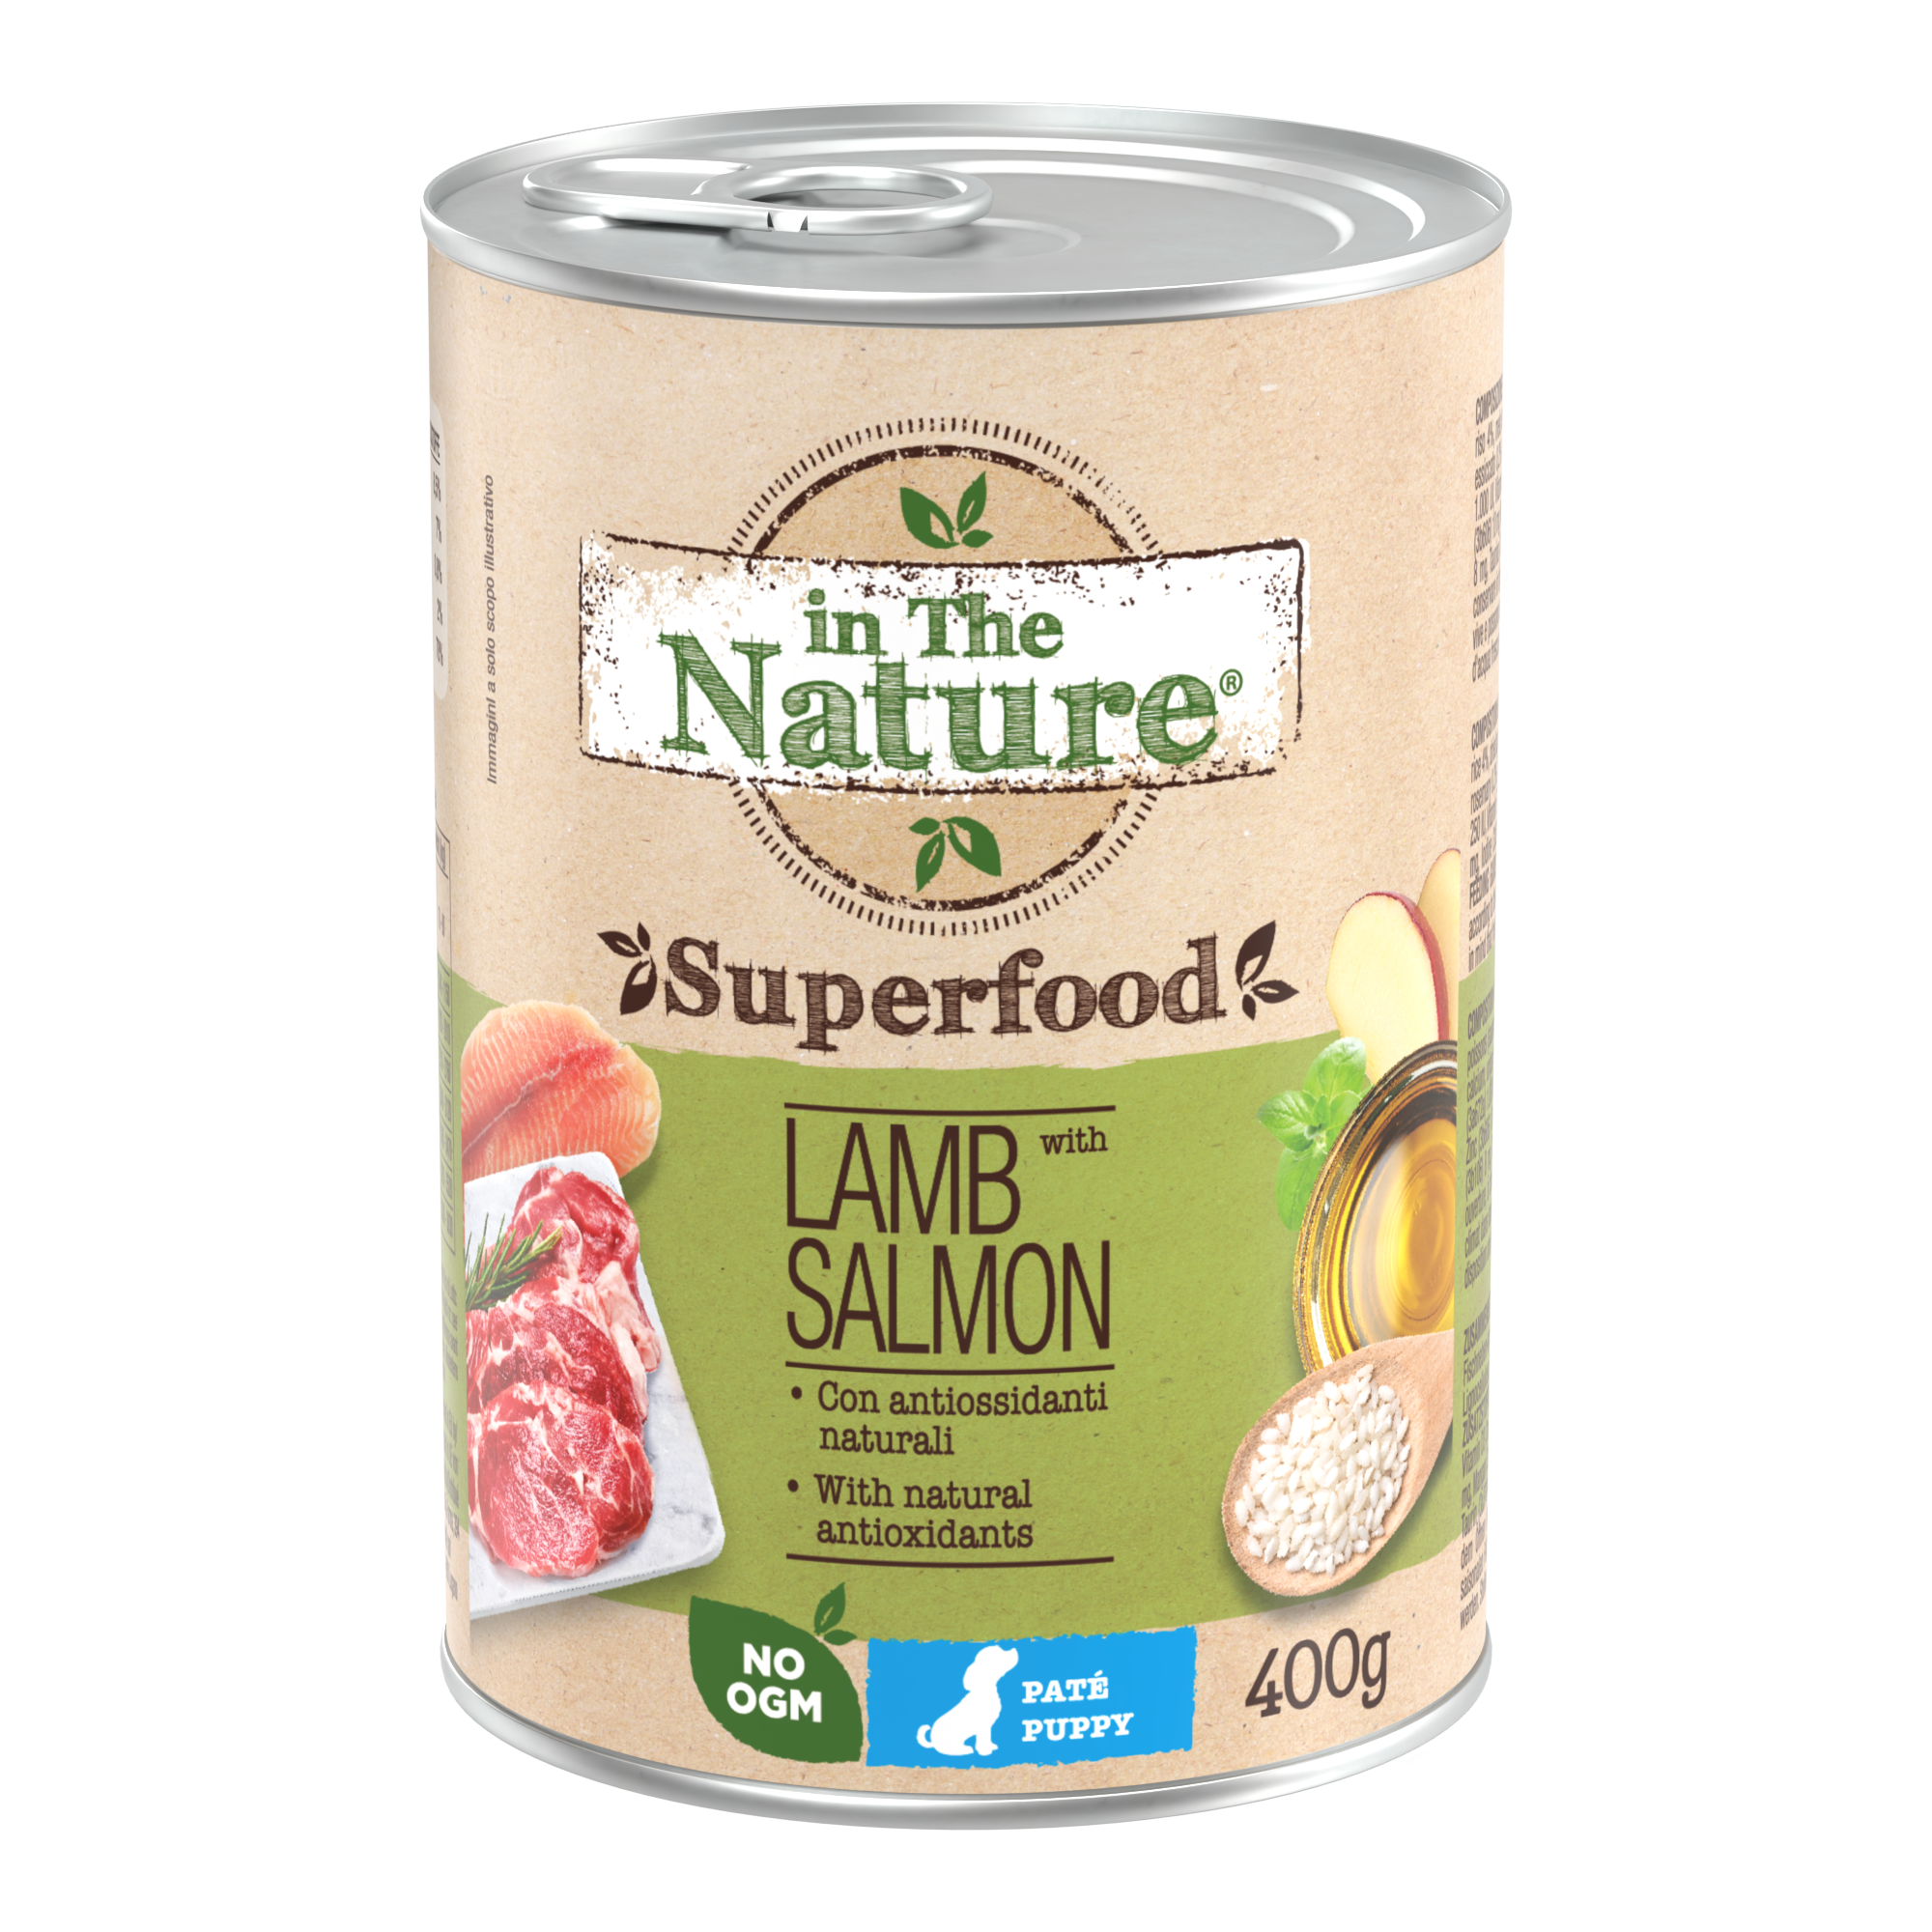 IN THE NATURE PATÉ SUPERFOOD PUPPY